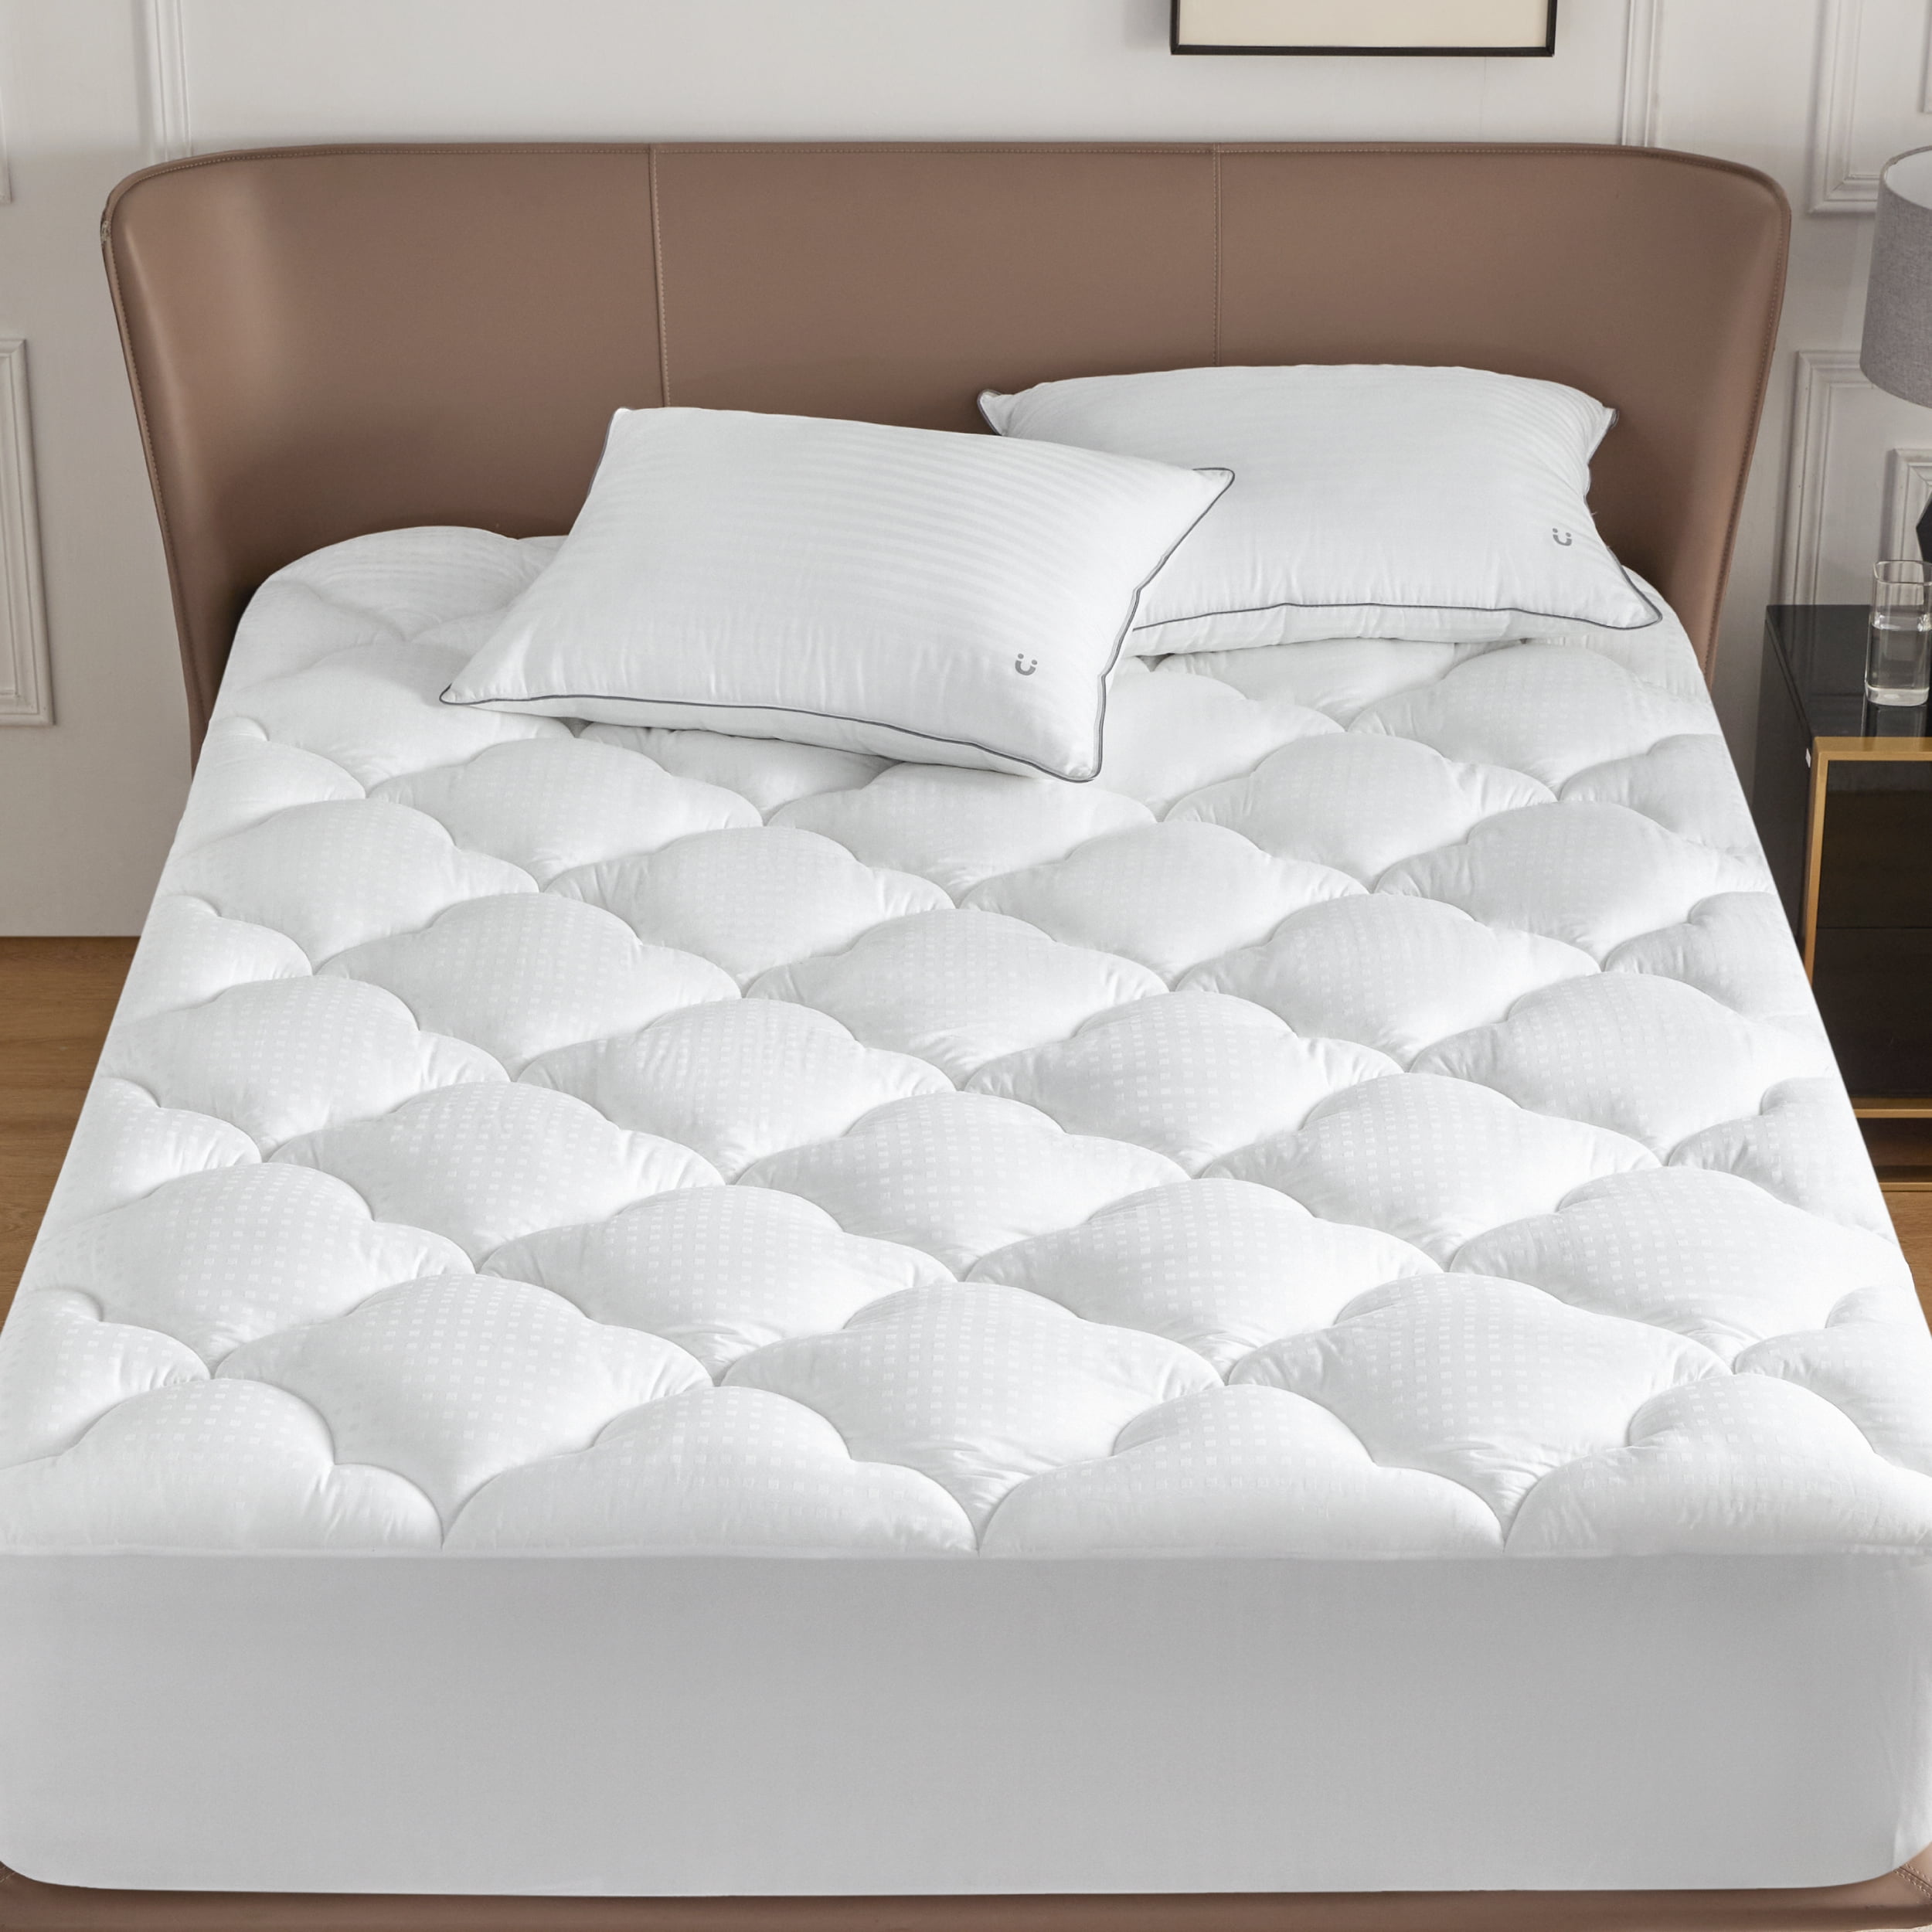 Mattress Toppers Mattress Topper with Fixing Straps, Bedroom Decorative  Quilted Mattress, Double-Sided Velvet Cotton Mattress (Color : Style 2,  Size 